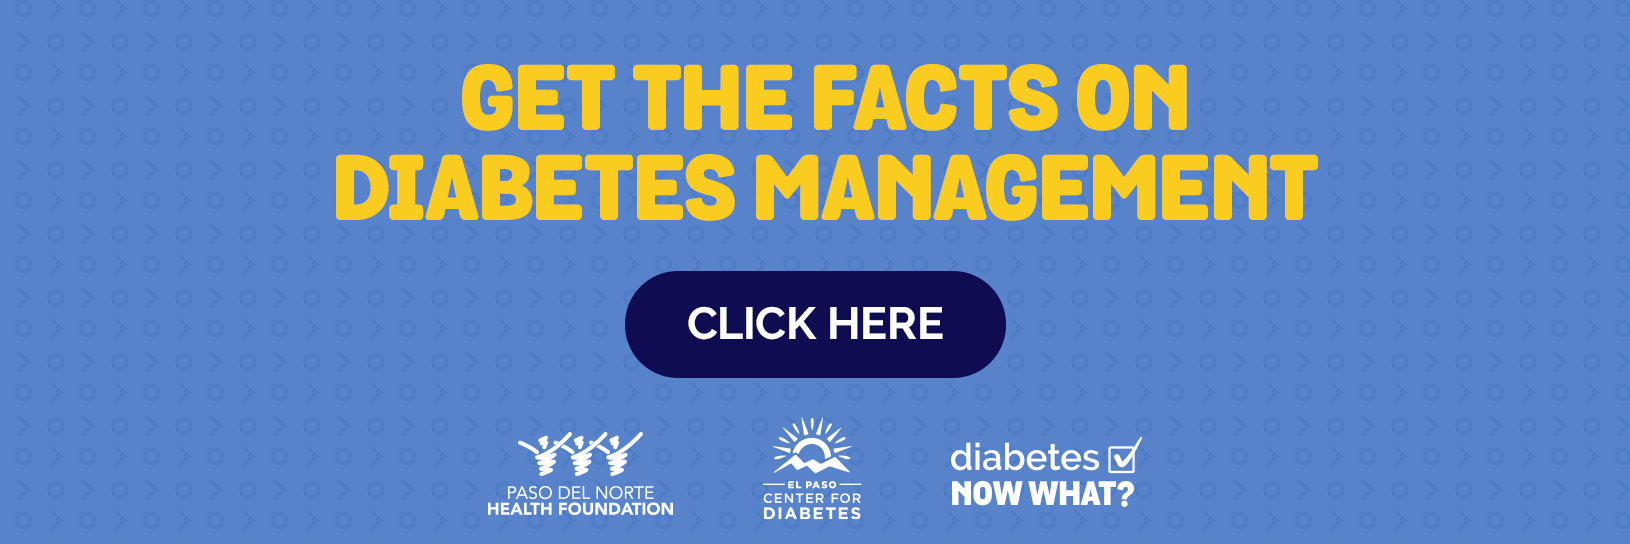 Get the Facts on Diabetes Management